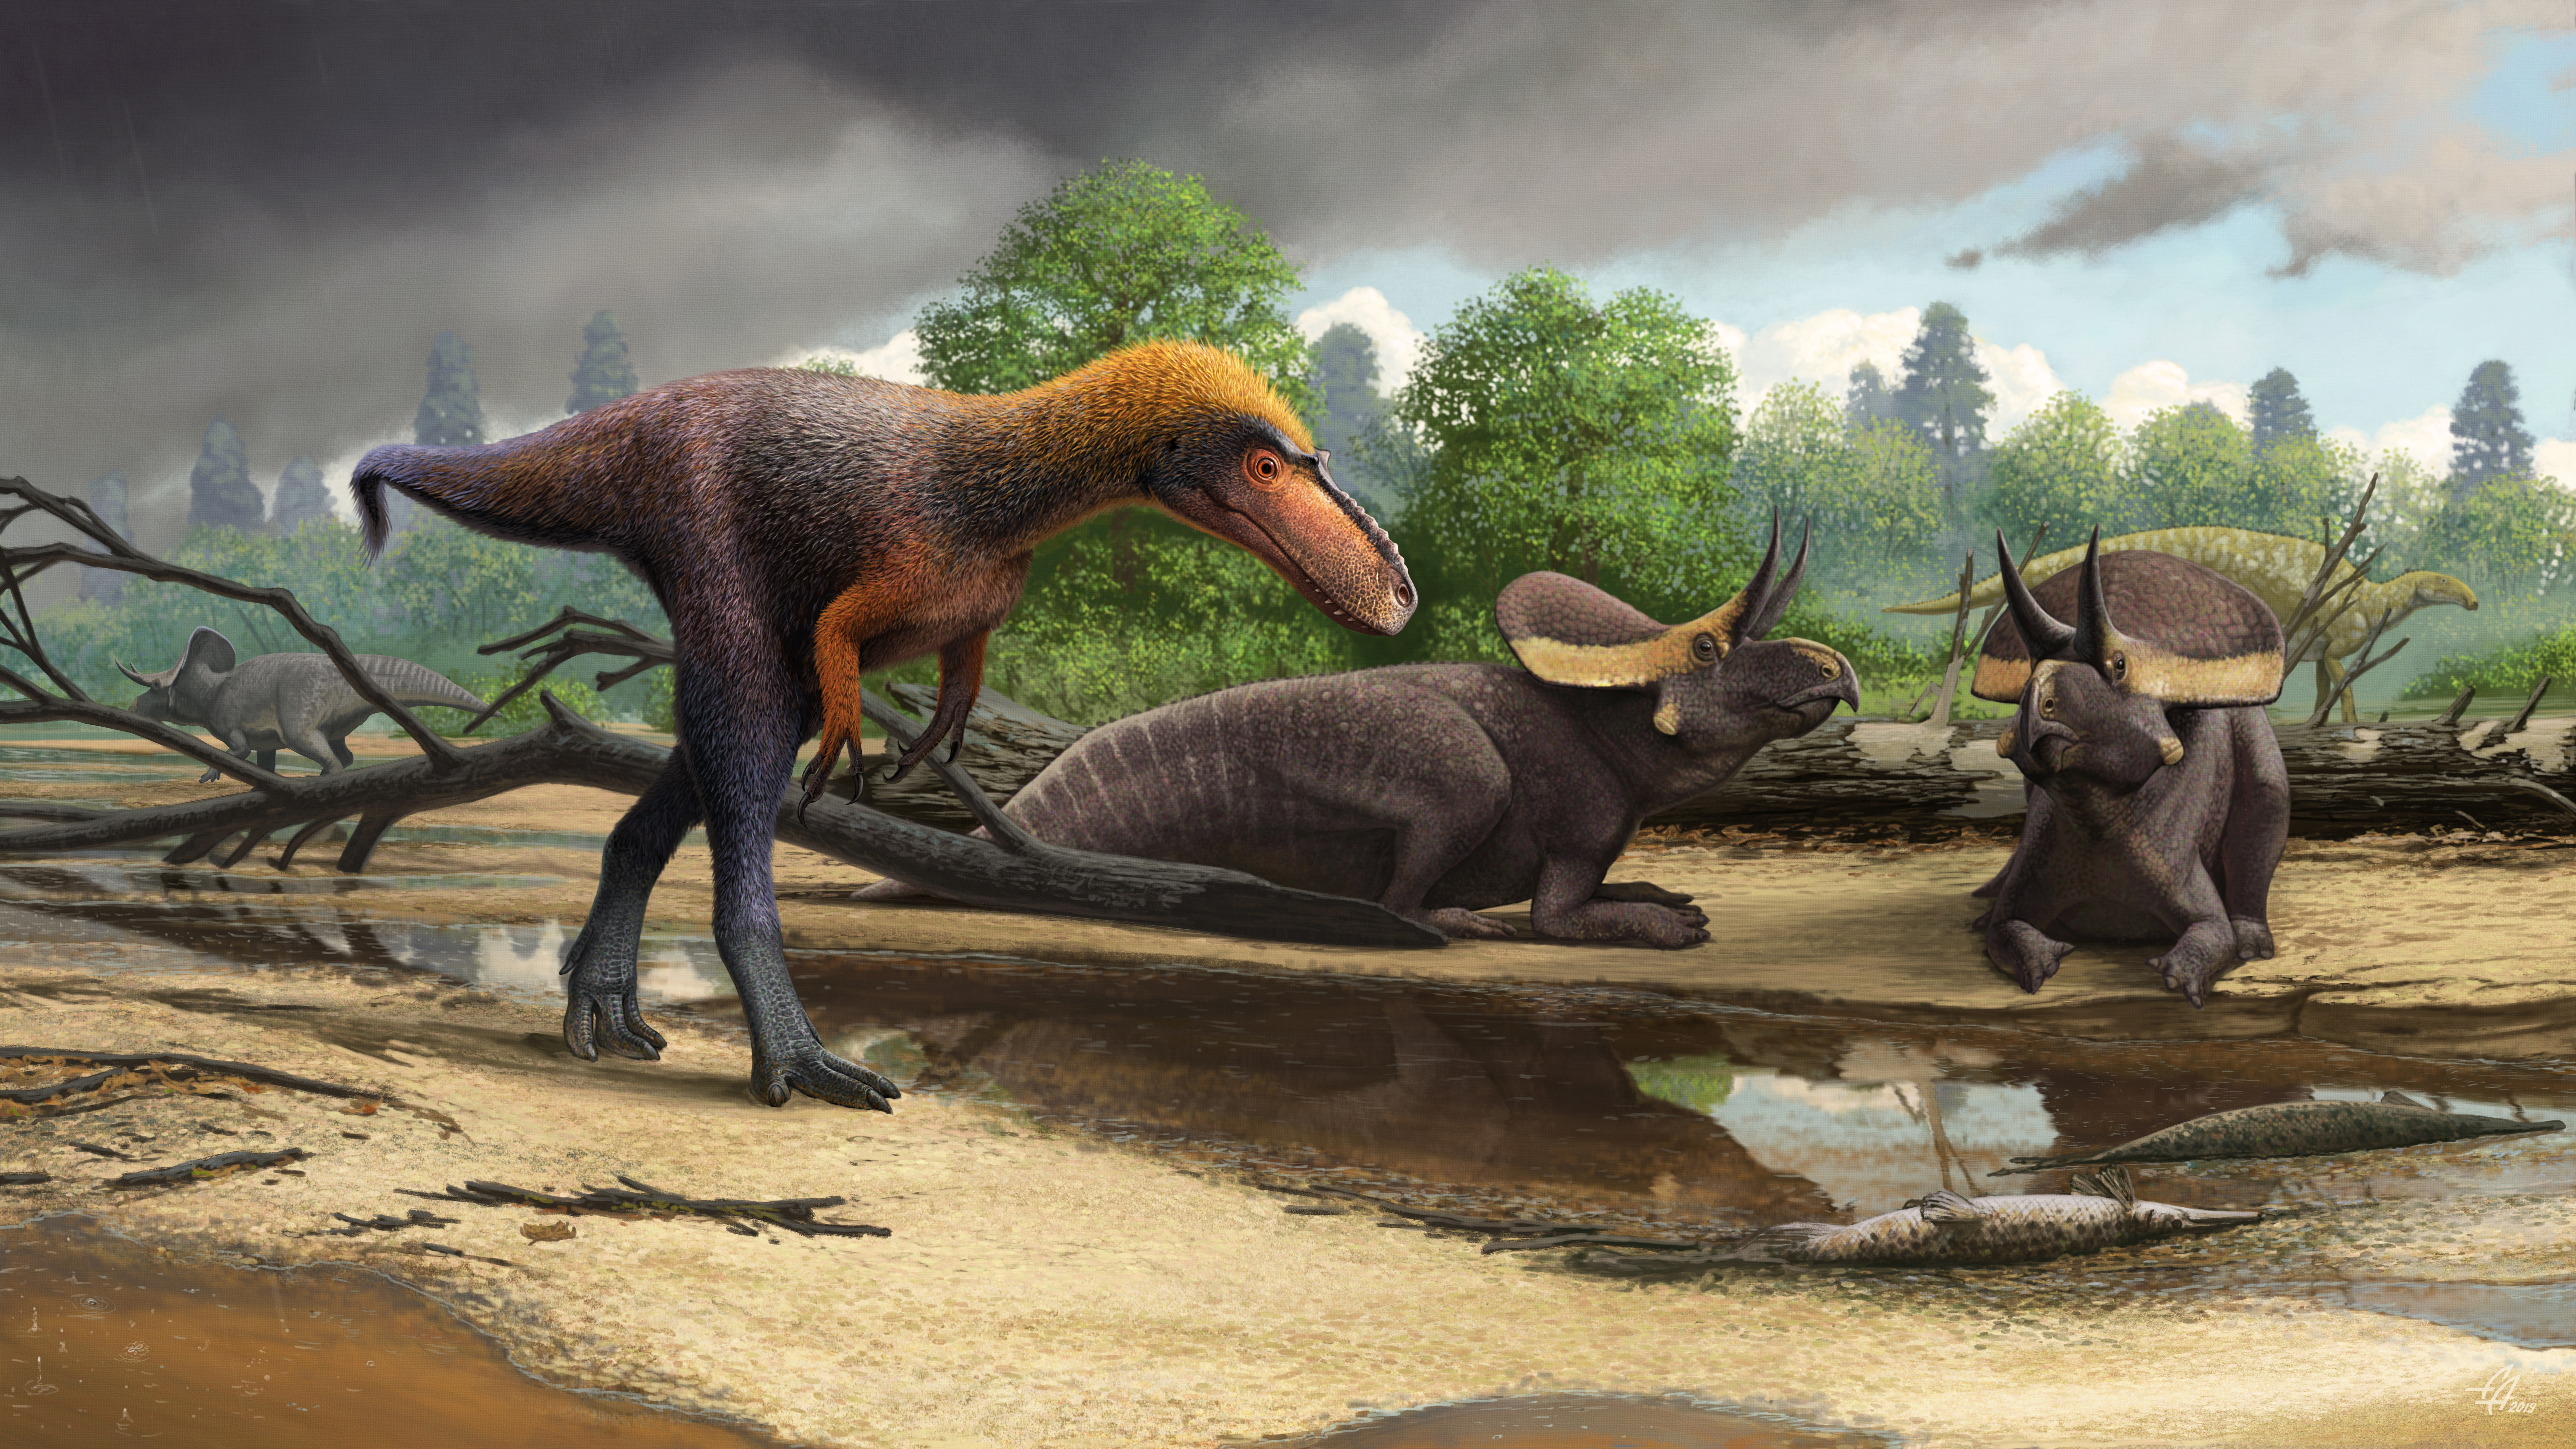 Reconstruction of the tyrannosauroid Suskityrannus hazelae from the Late Cretaceous (~92 million years ago) near the small ceratopsoid Zuniceratops and the hadrosauromorph Jeyawati in the background.  Credit: Andrey Atuchin Email: aatuch@yandex.ru